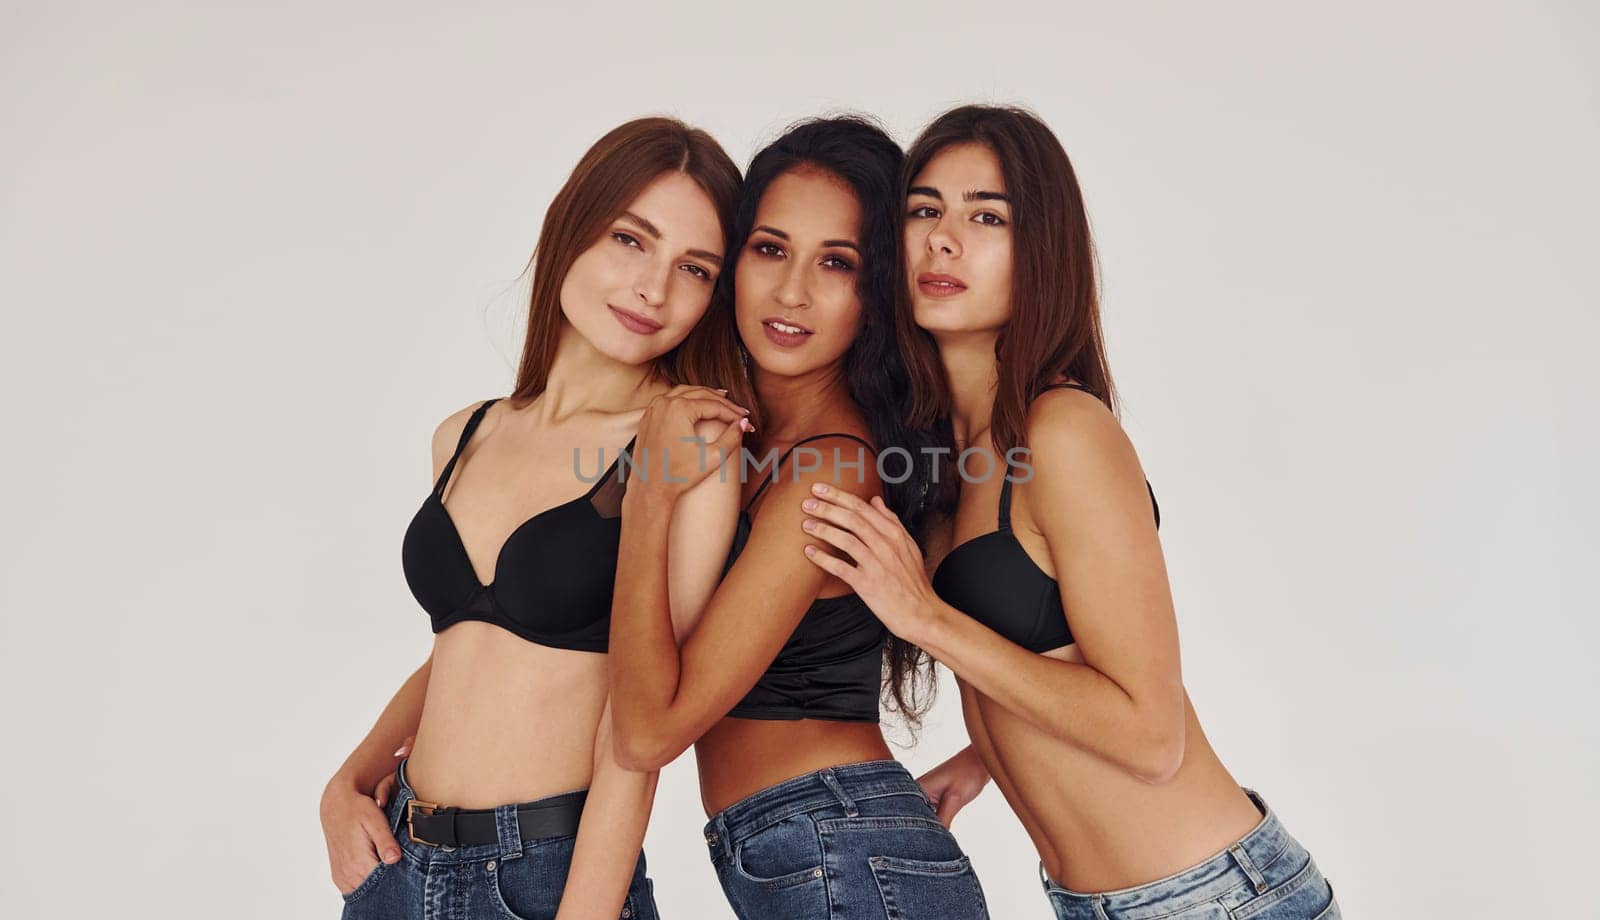 Three young women in lingerie together indoors. White background by Standret